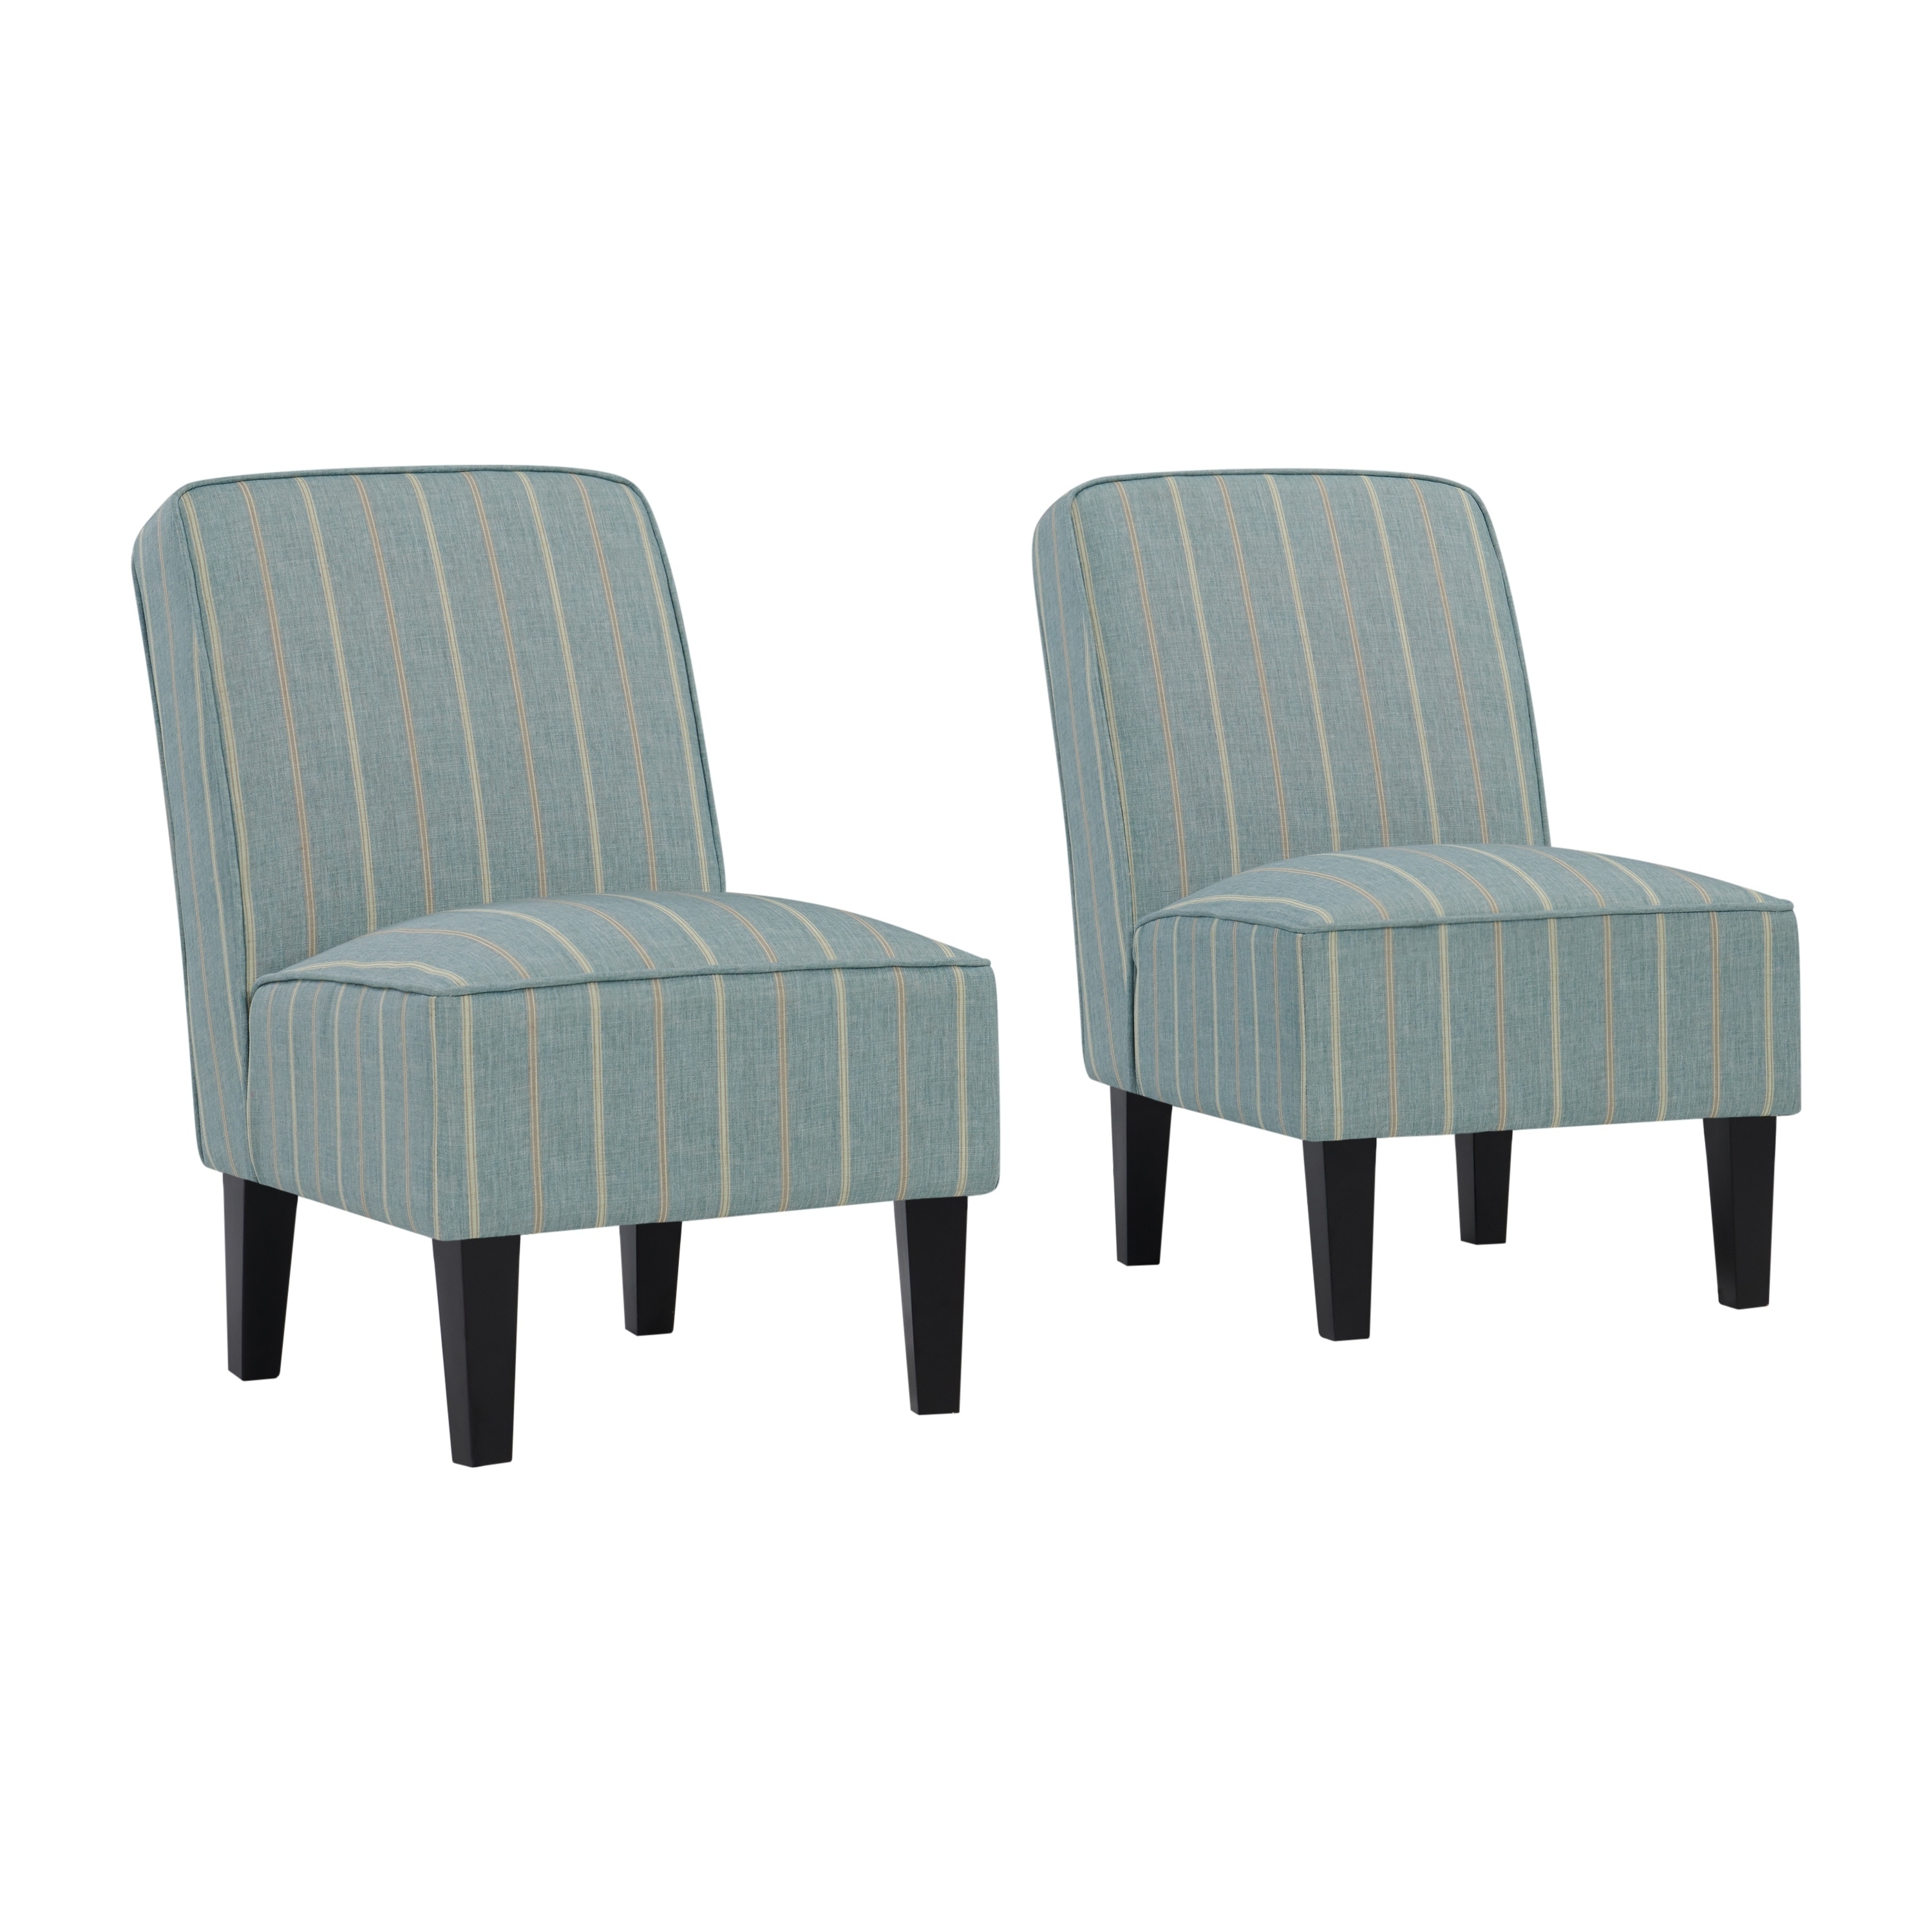 Handy Living Brodee Armless Accent Chairs Set Of 2 F10cf028 844a 4be0 B8ce 8353427f54ab 